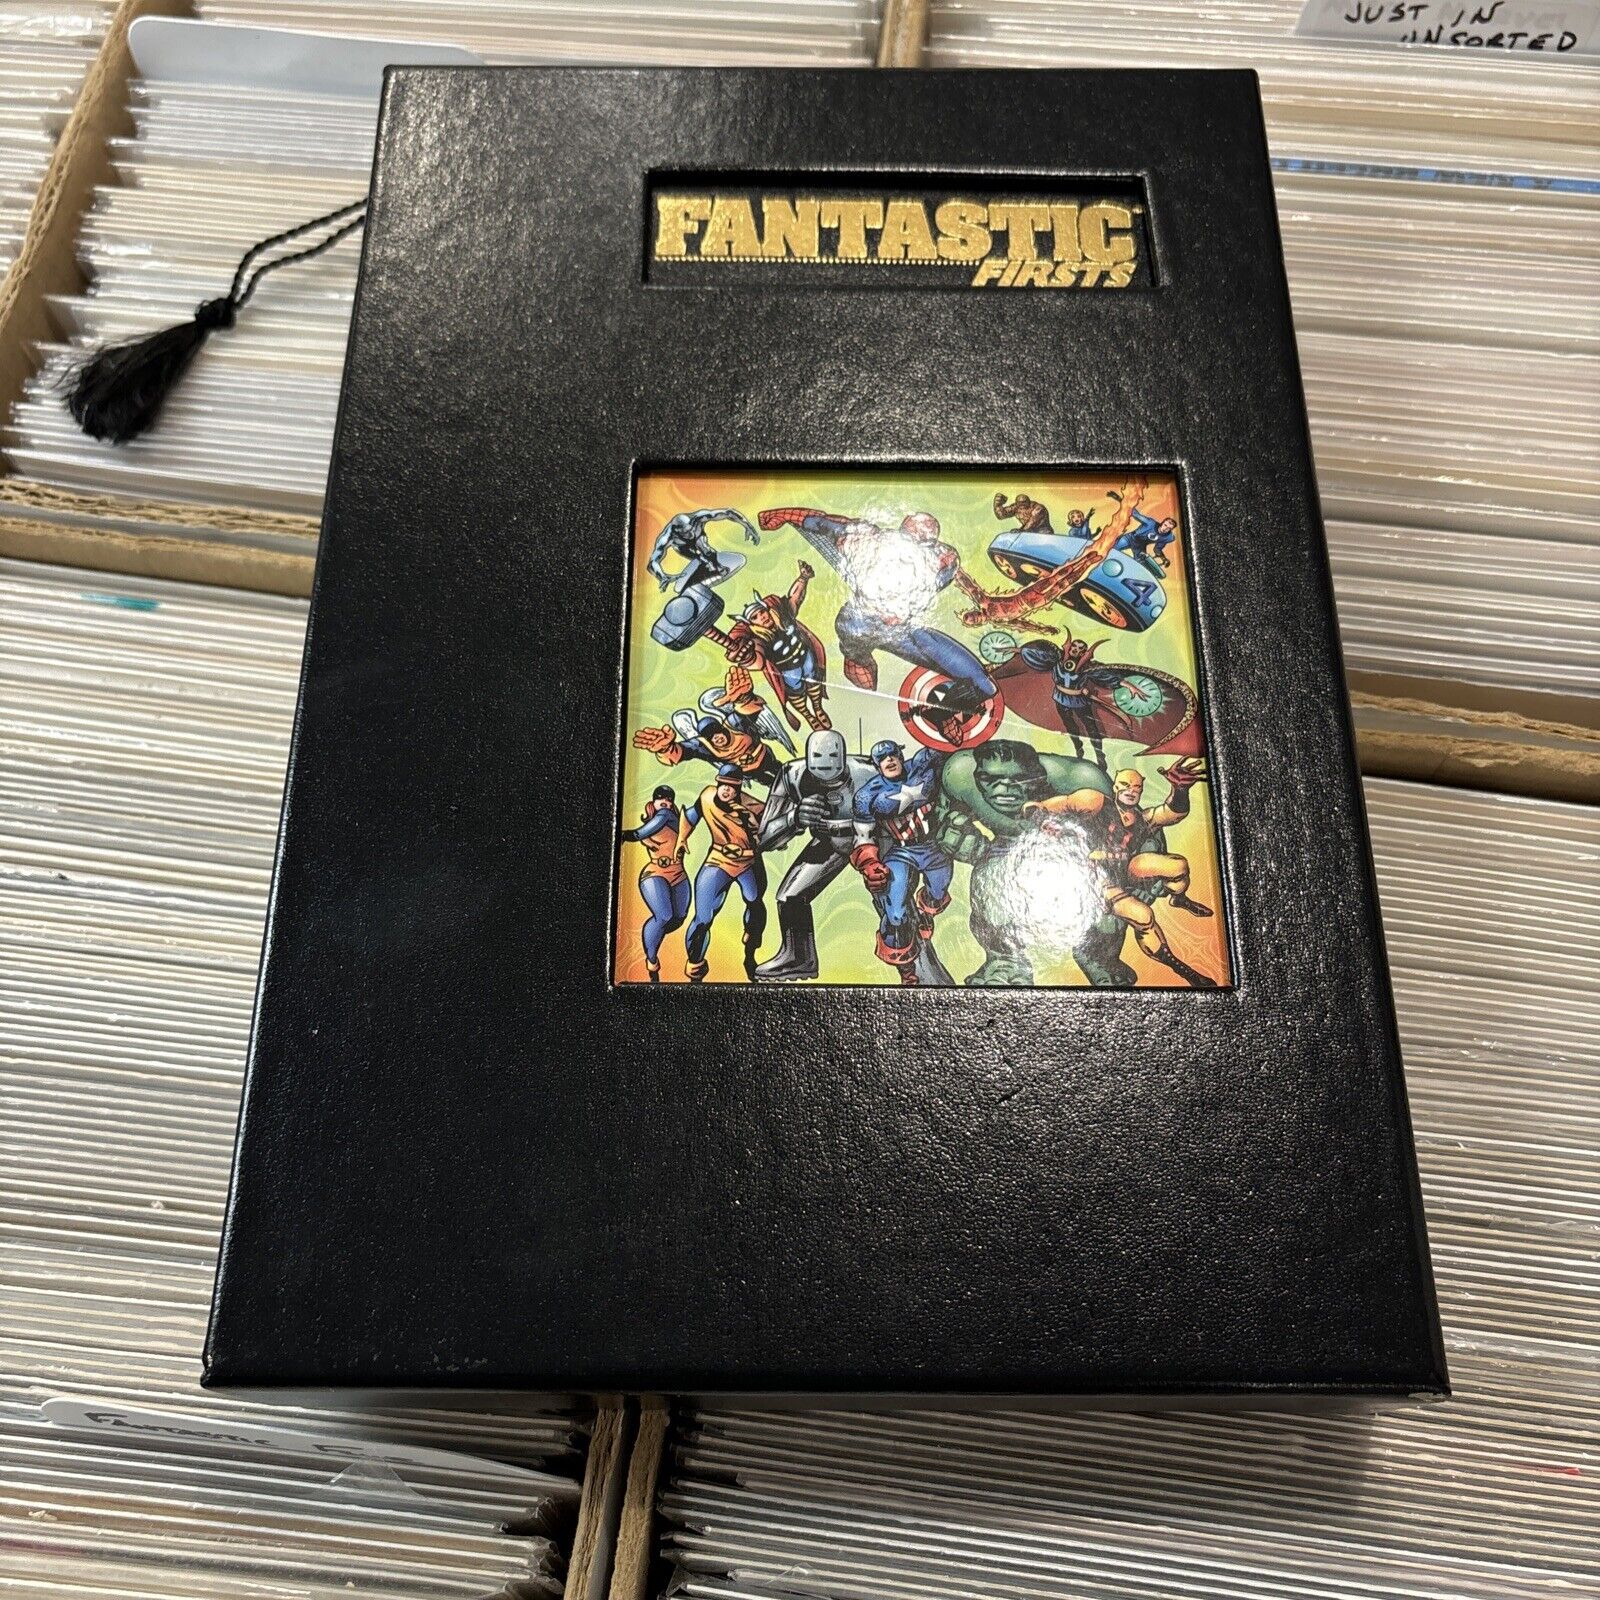 Marvel Limited: Fantastic Firsts #1 Hardcover Slipcase Beautiful Book